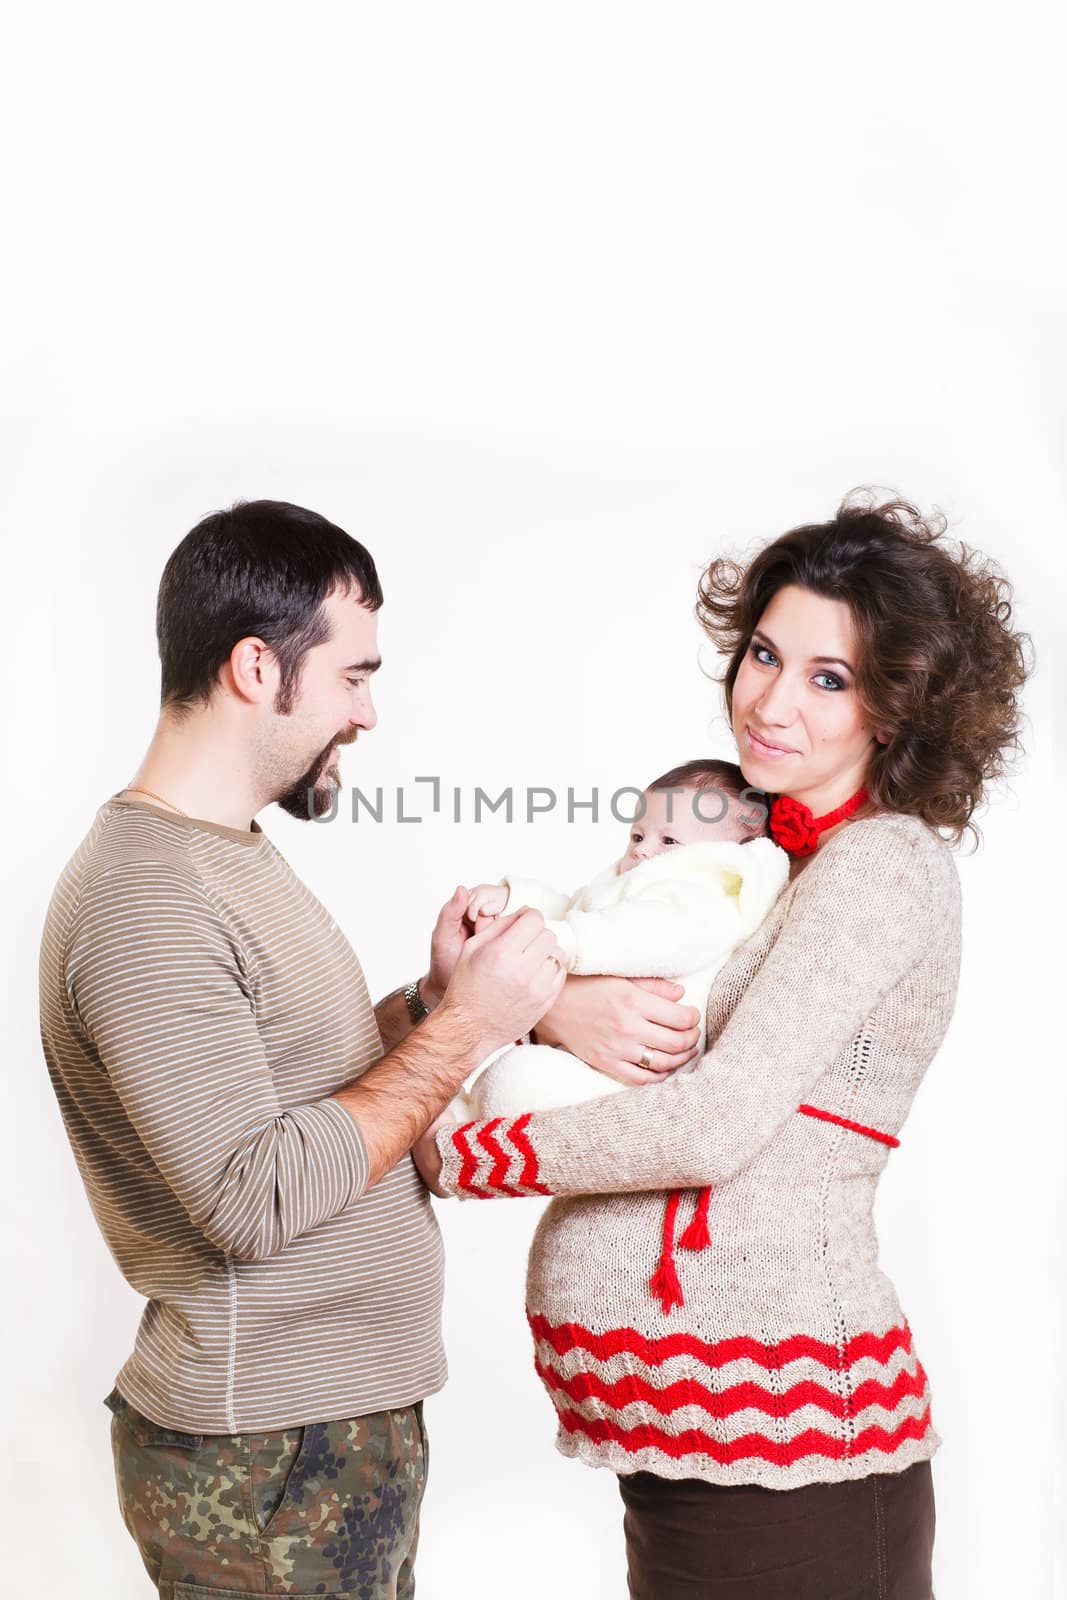 pregnant woman with her ​​husband and child isolated on white background